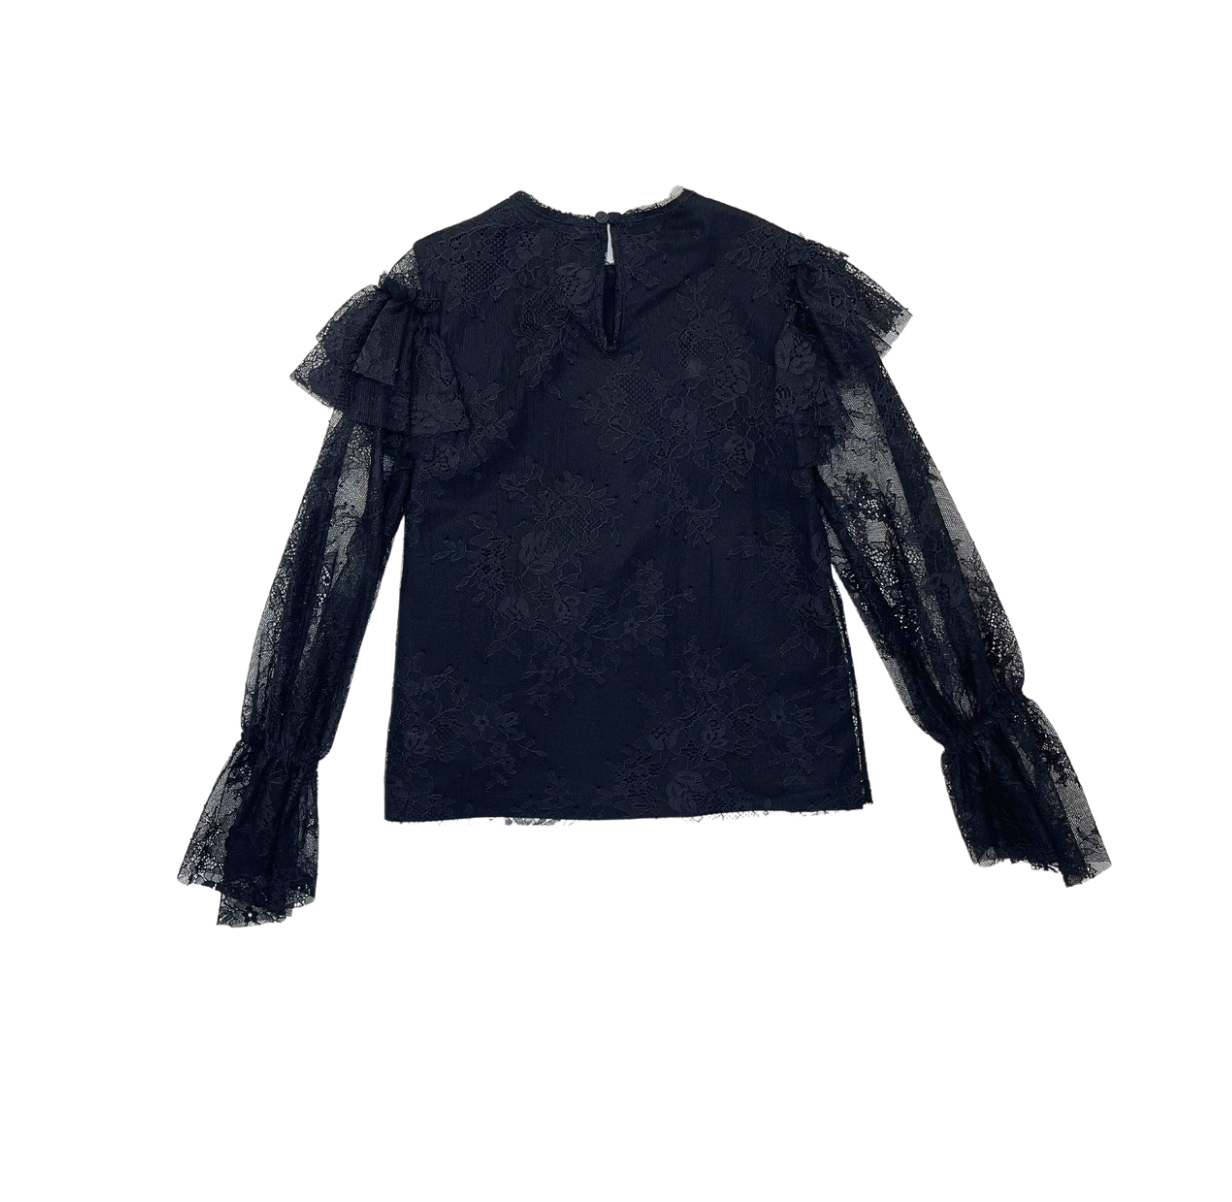 PHILOSOPHY DI LORENZO - Black lace blouse - 6 years old